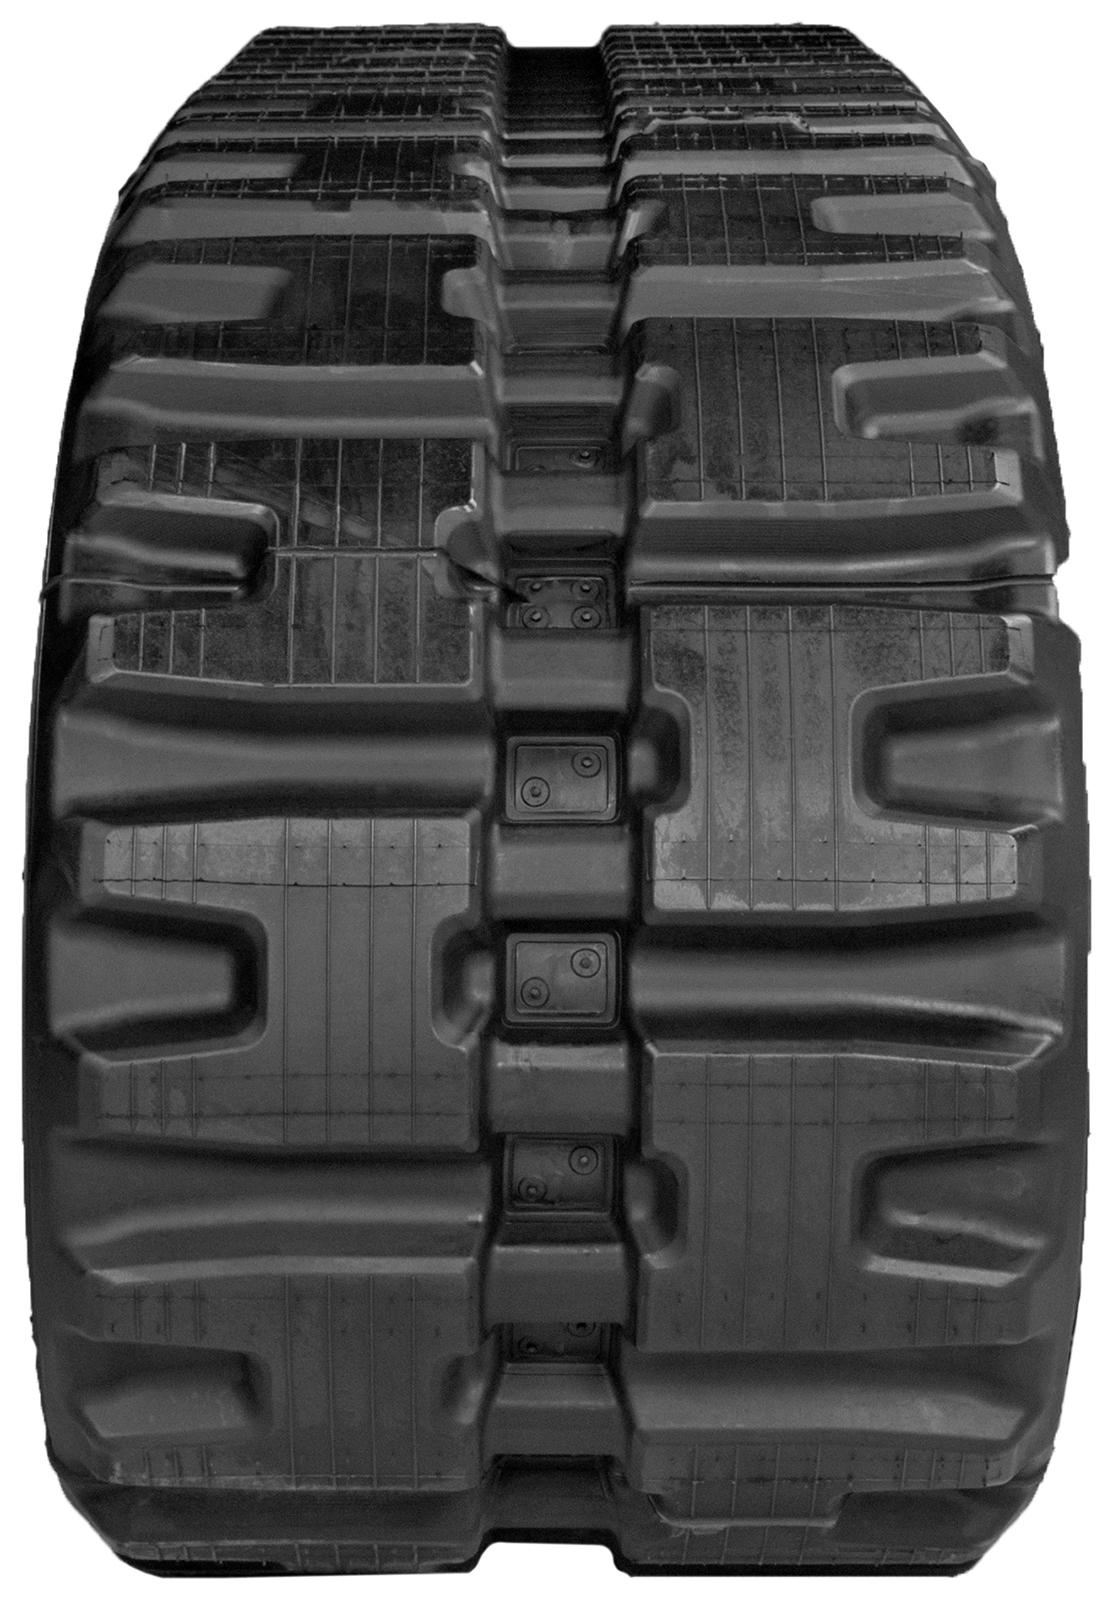 set of 2 18" camso extreme duty hxd pattern rubber tracks (450x86bx55)